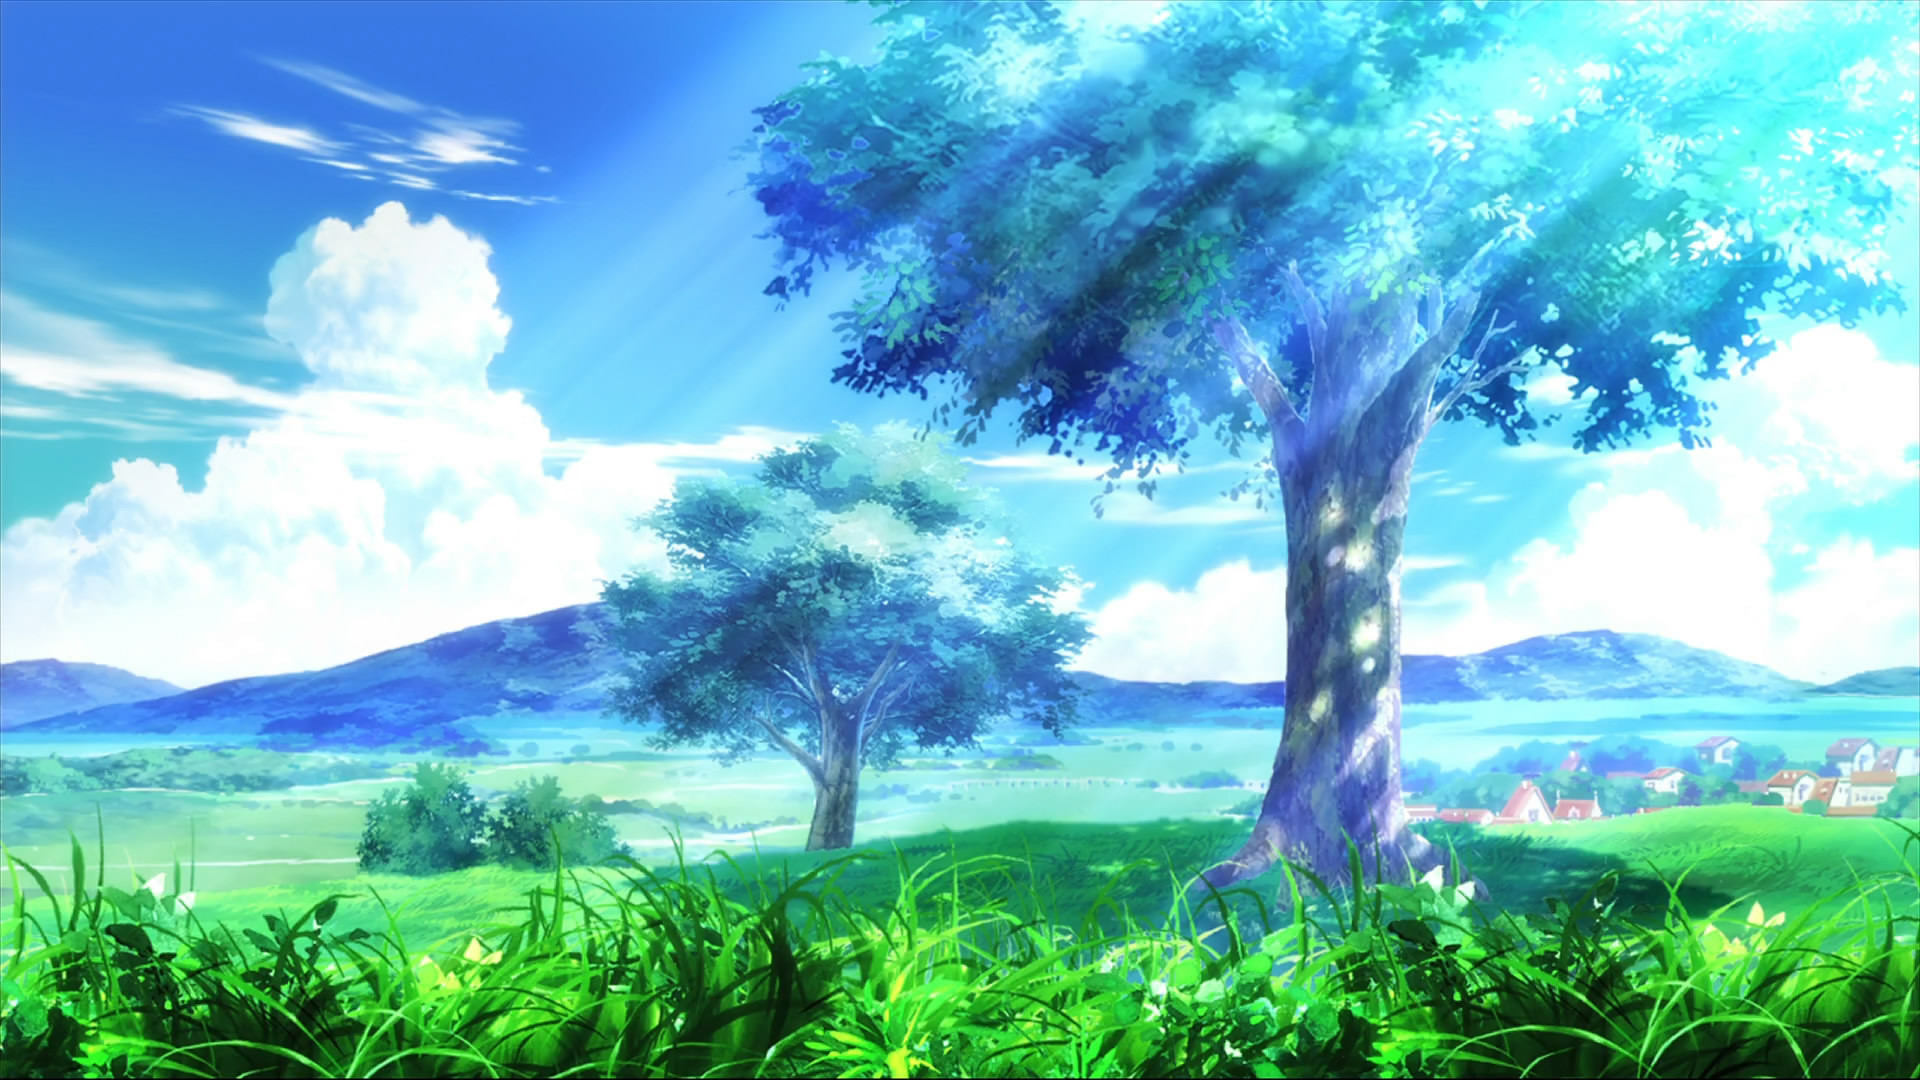 Anime Scenery Wallpaper (48+ images)